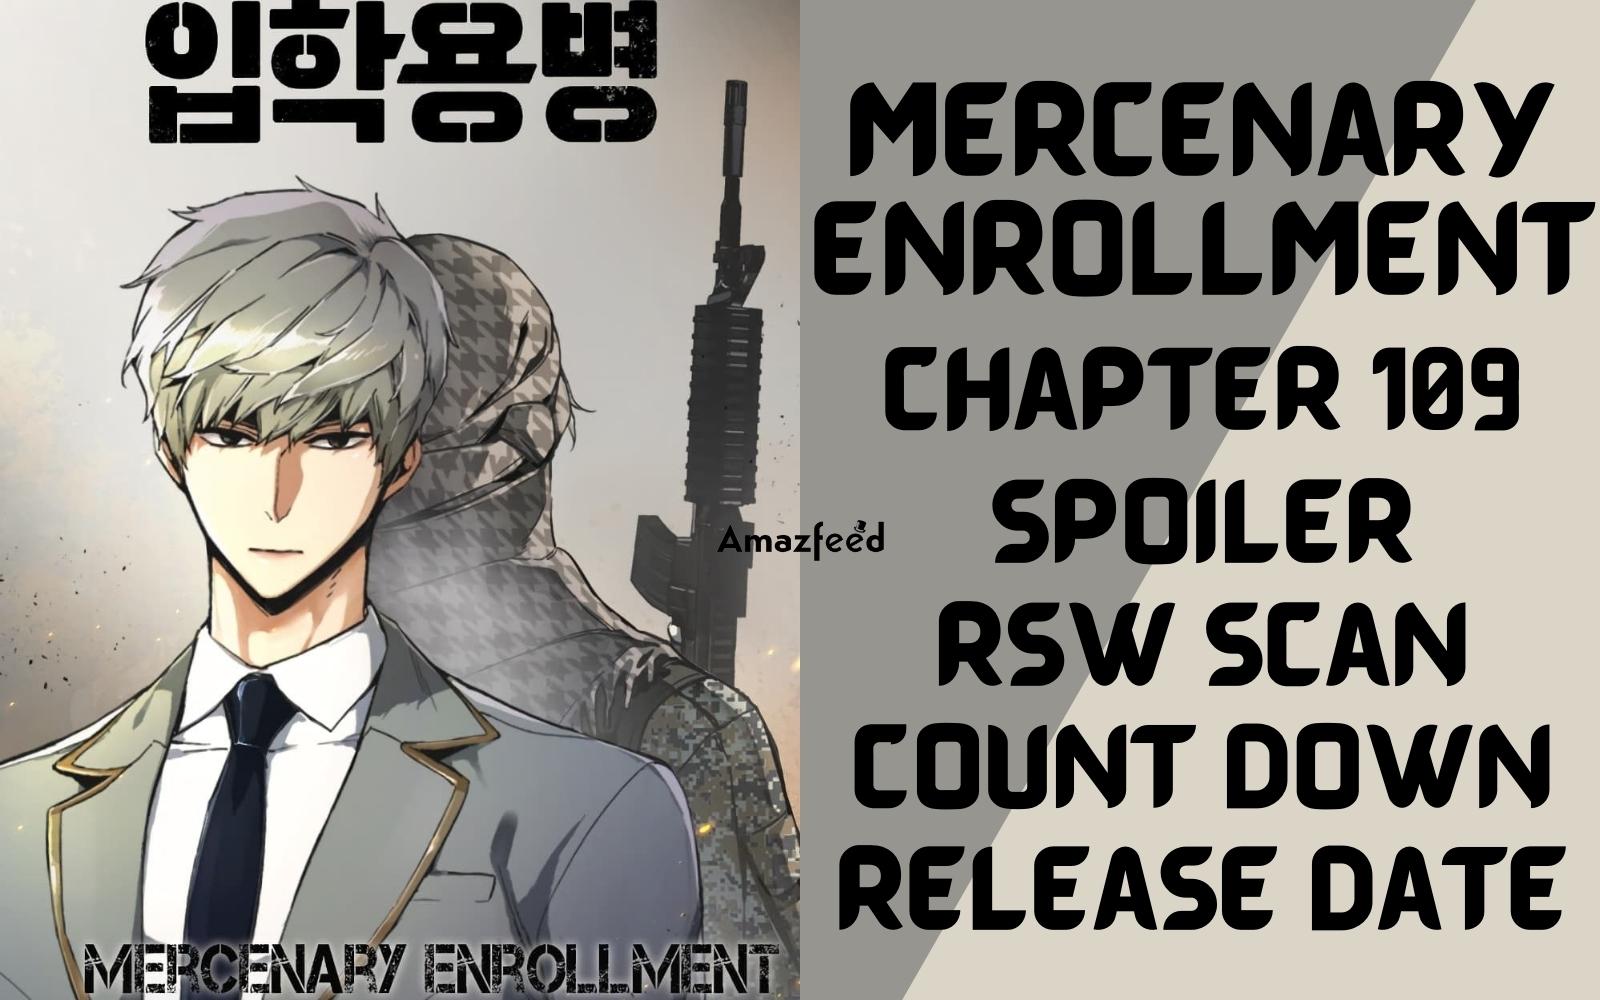 Mercenary Enrollment Chapter 109 Spoiler, Countdown, About, Synopsis, Release Date